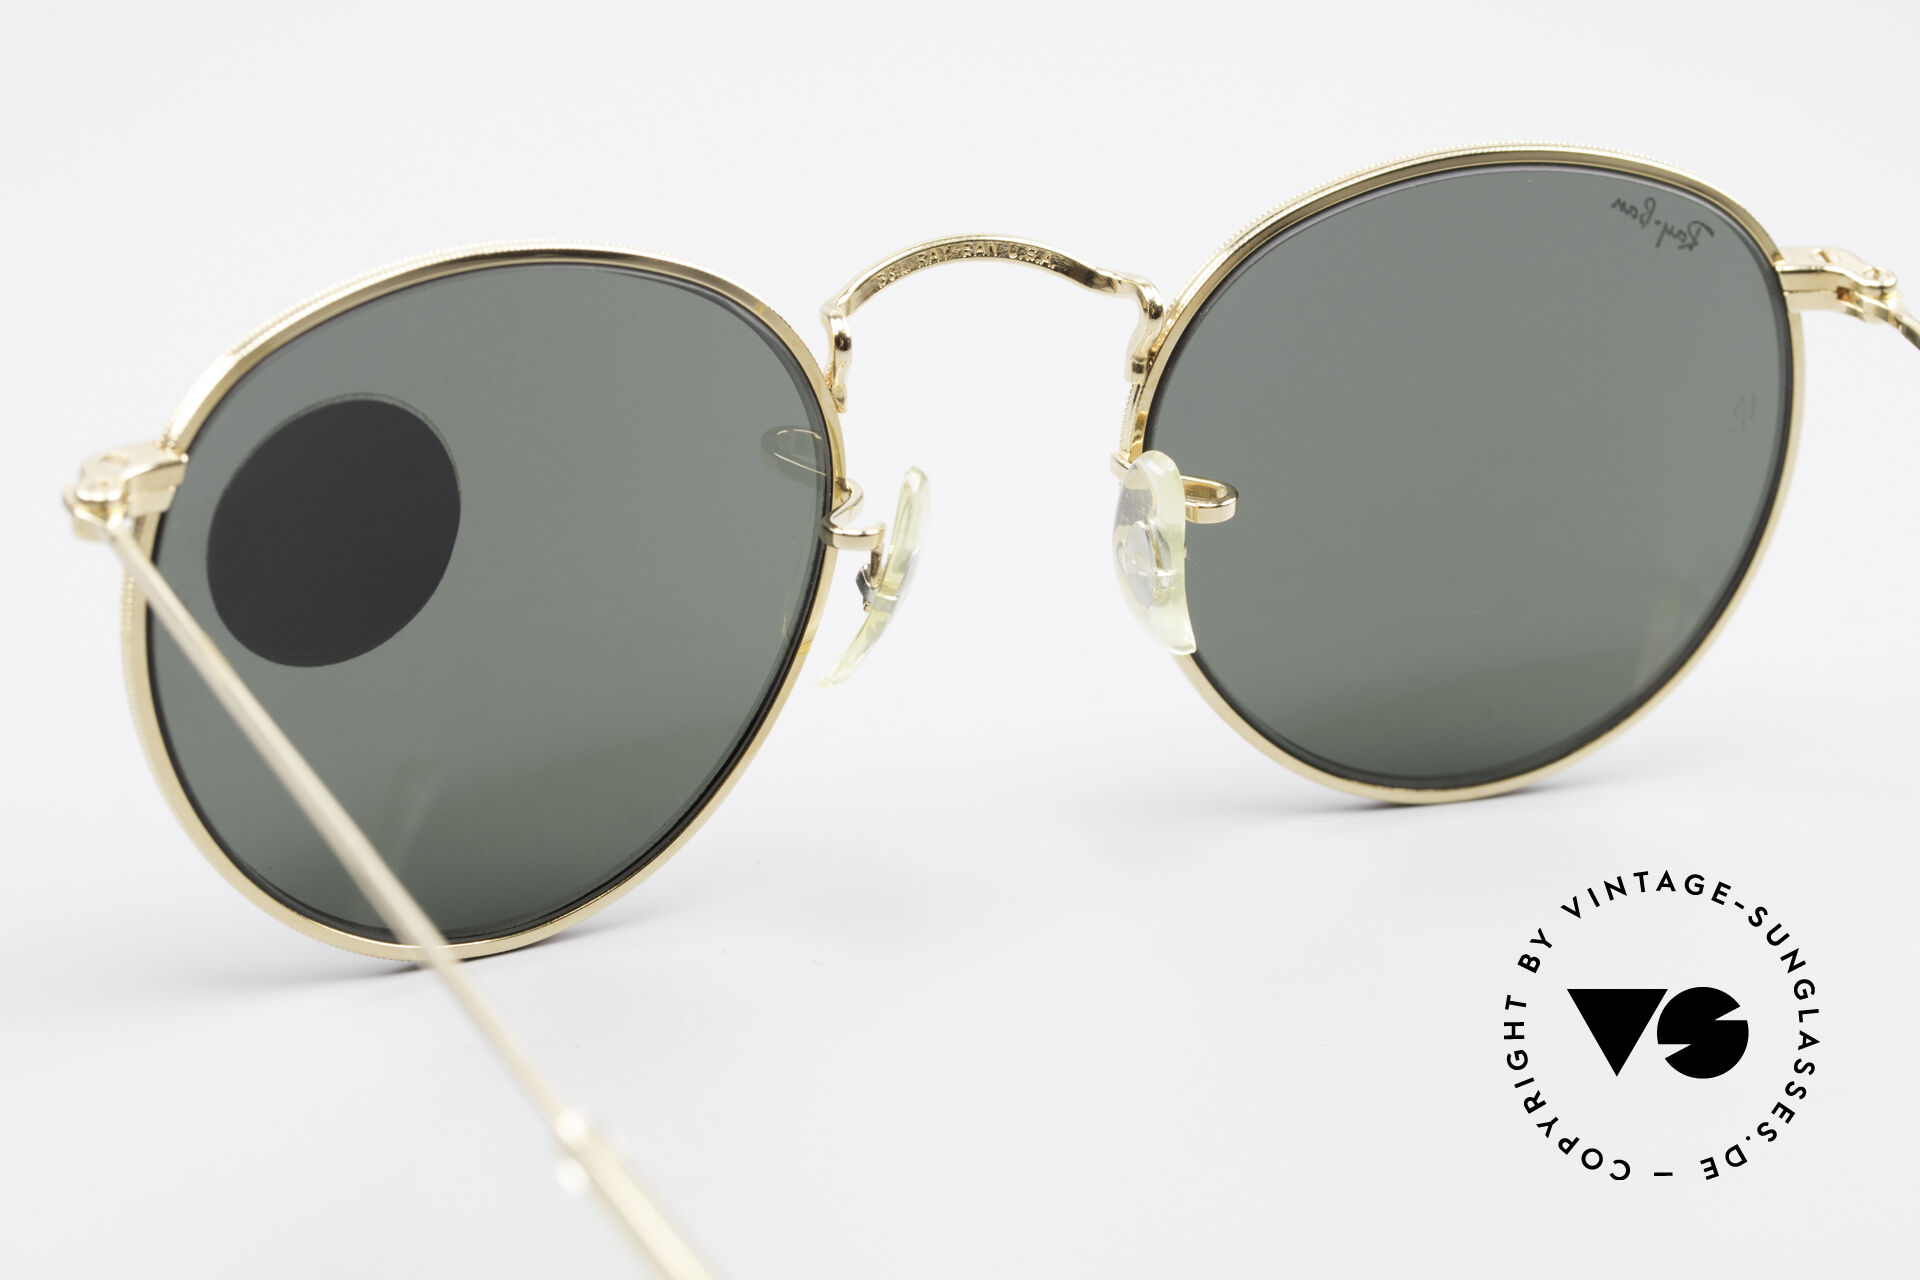 https://www.vintage-sunglasses.de/media/products6/full/14466_17197_Ray-Ban-Round-Metal-47_Small-Round-BandL-Sunglasses_Men_Women_Round_Sunglasses.jpg